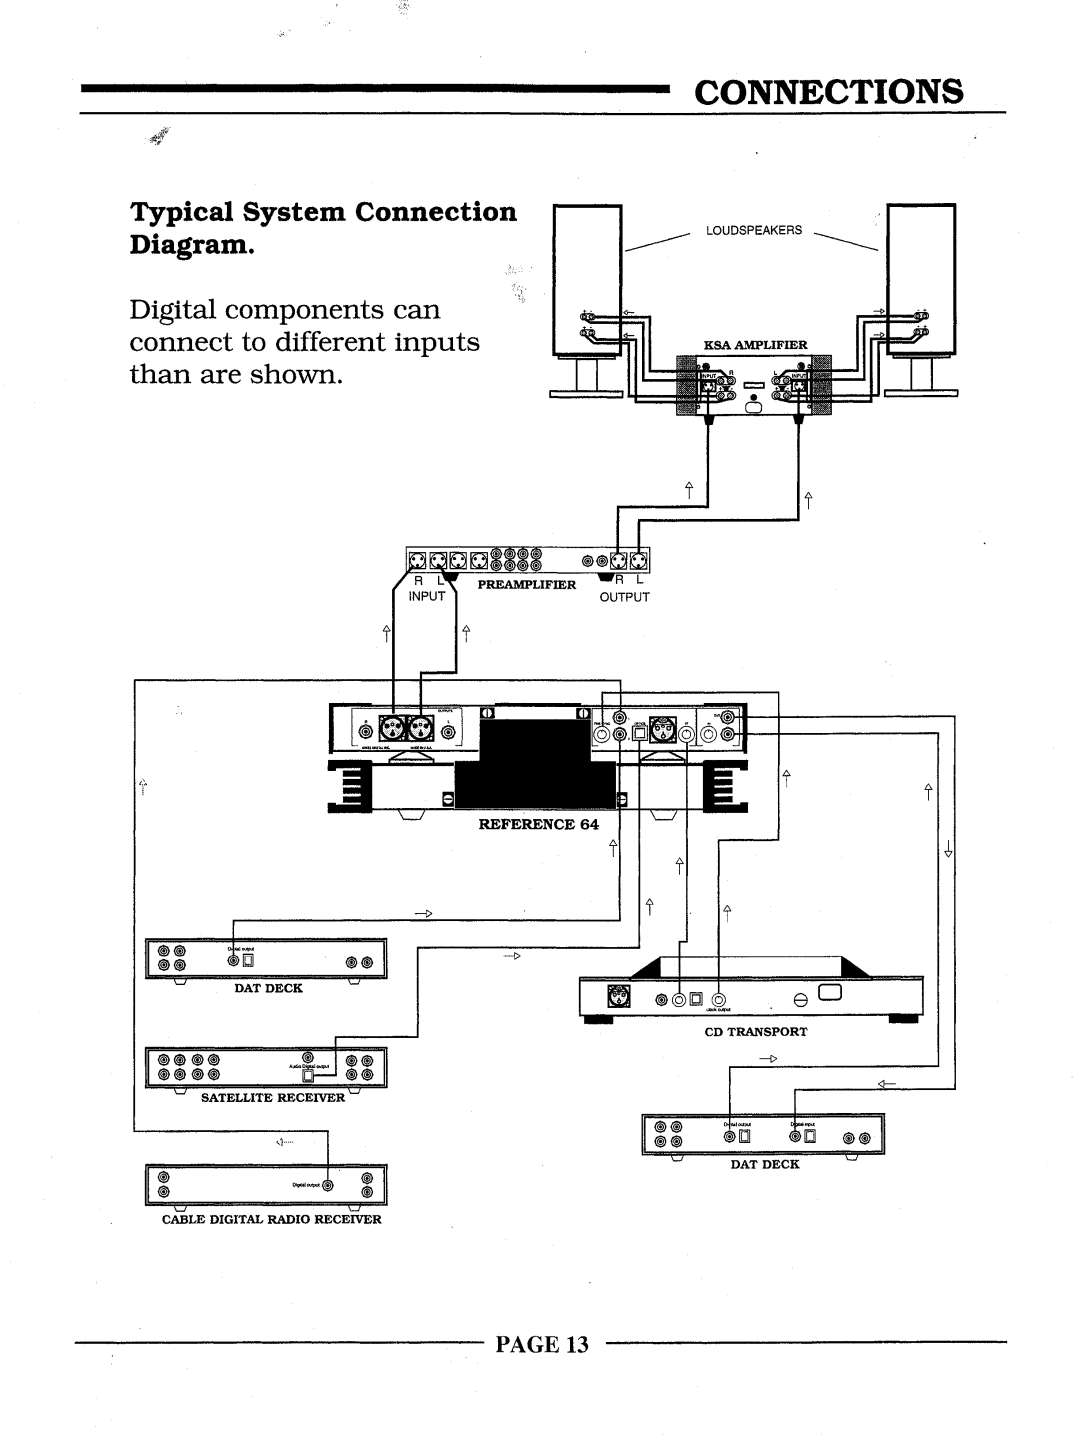 Krell Industries REFERENCE 64 Typical System Connection Diagram, PAGE13, Connections, Loudspeakers, Ksa Amplifier, Output 